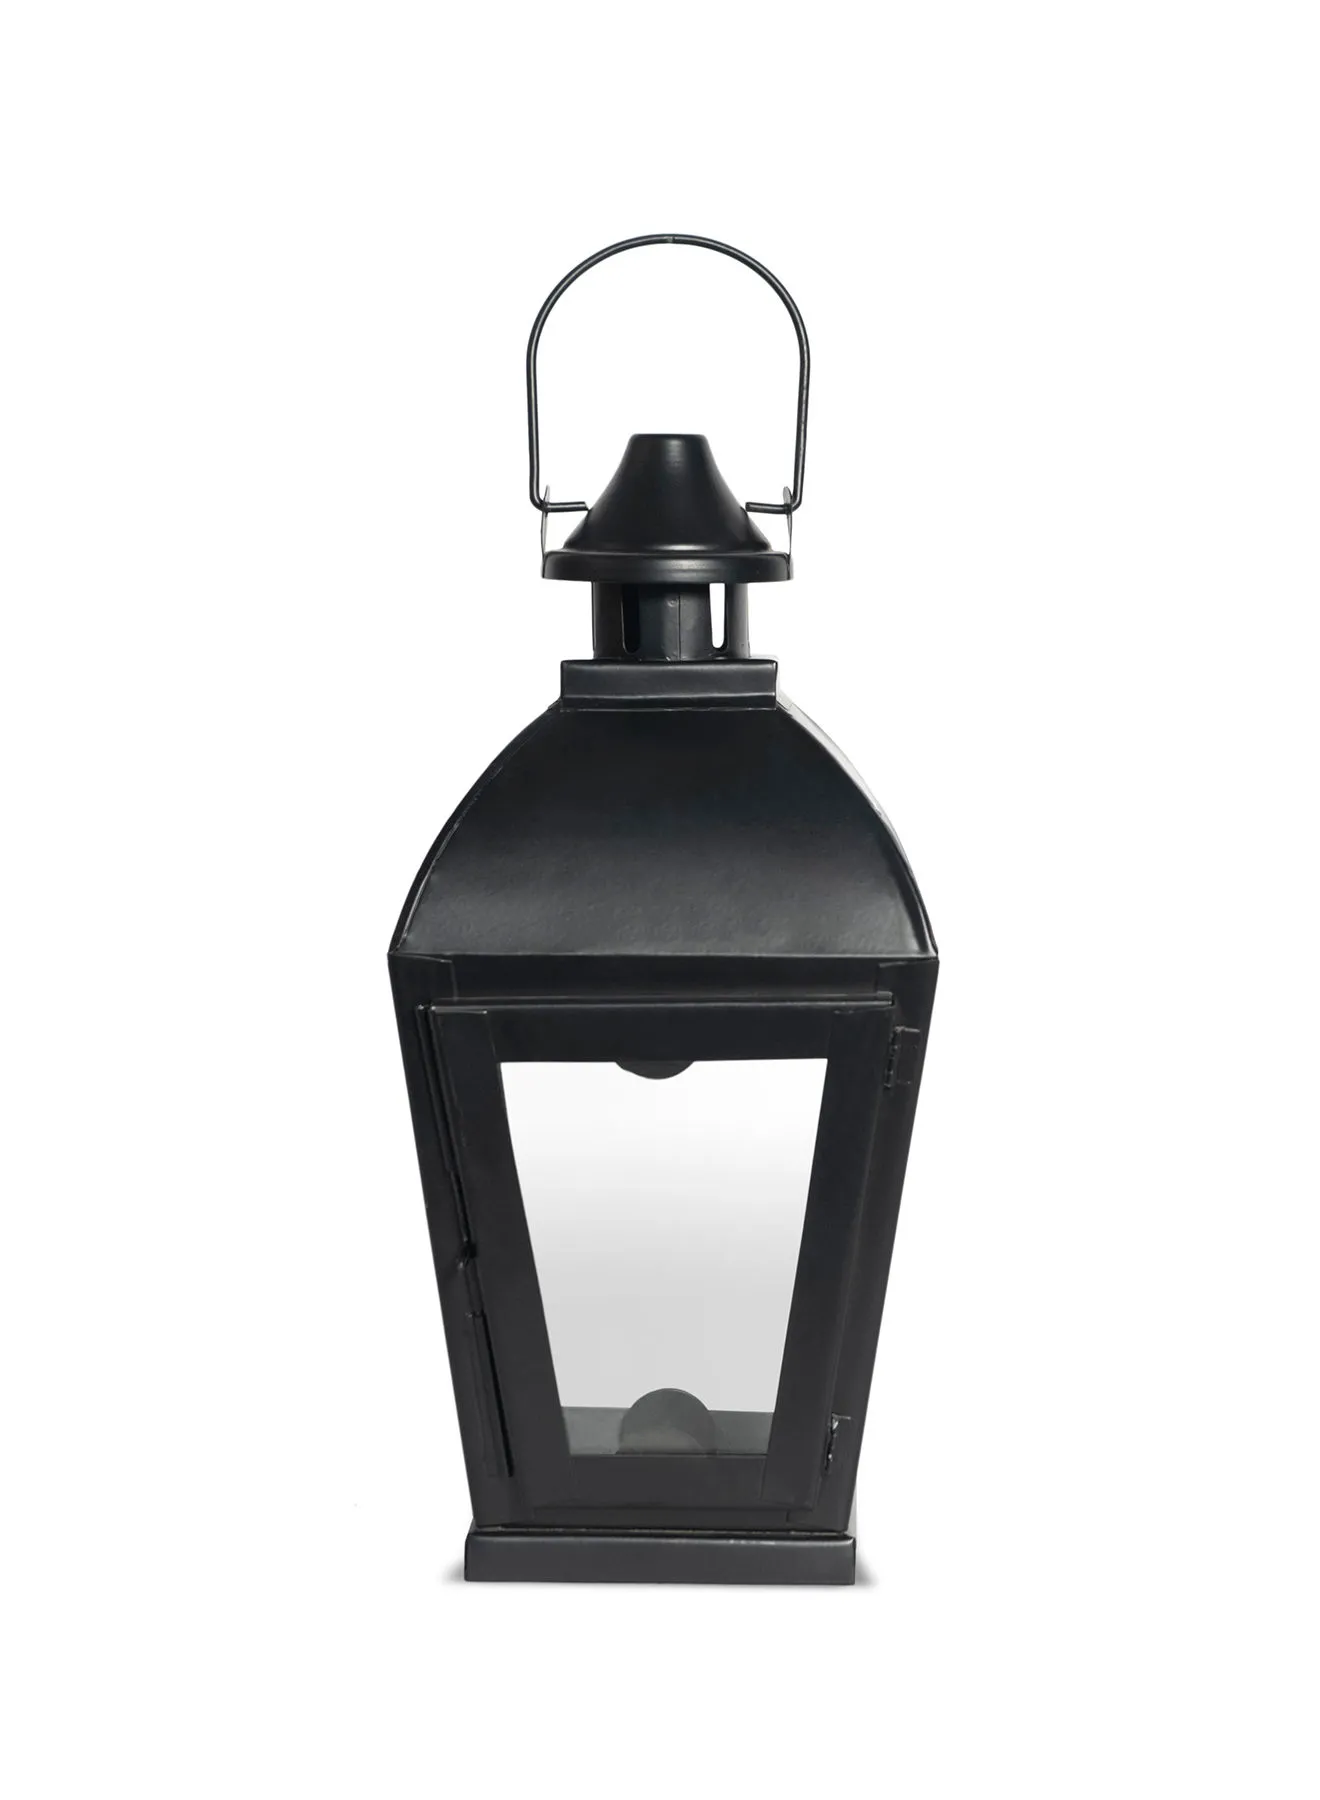 ebb & flow Modern Ideal Design Handmade Lantern Unique Luxury Quality Scents For The Perfect Stylish Home Black 8.63X8.63X27centimeter